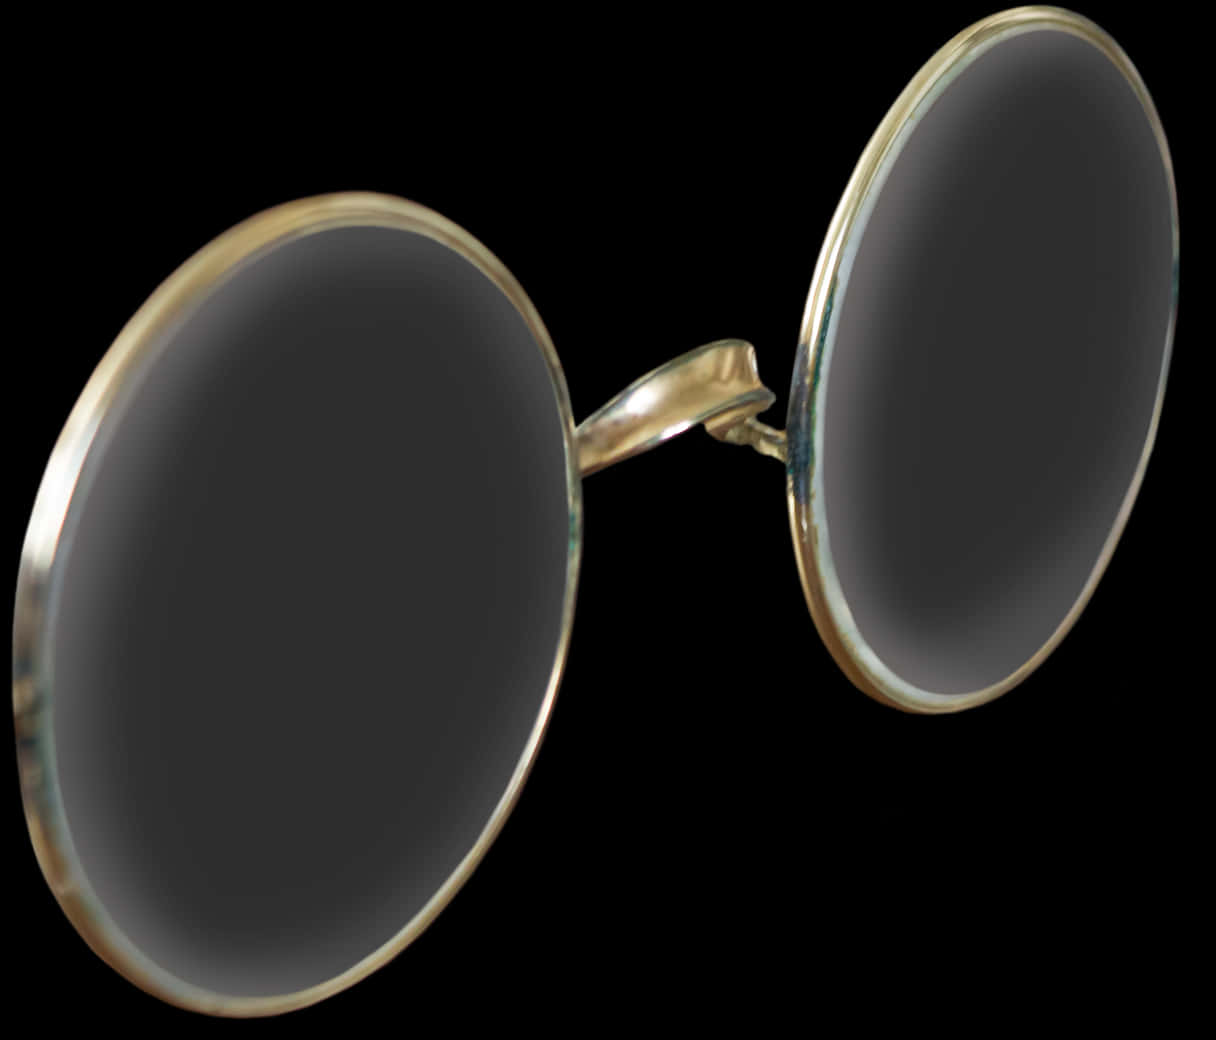 Vintage Round Glasses Isolated PNG image